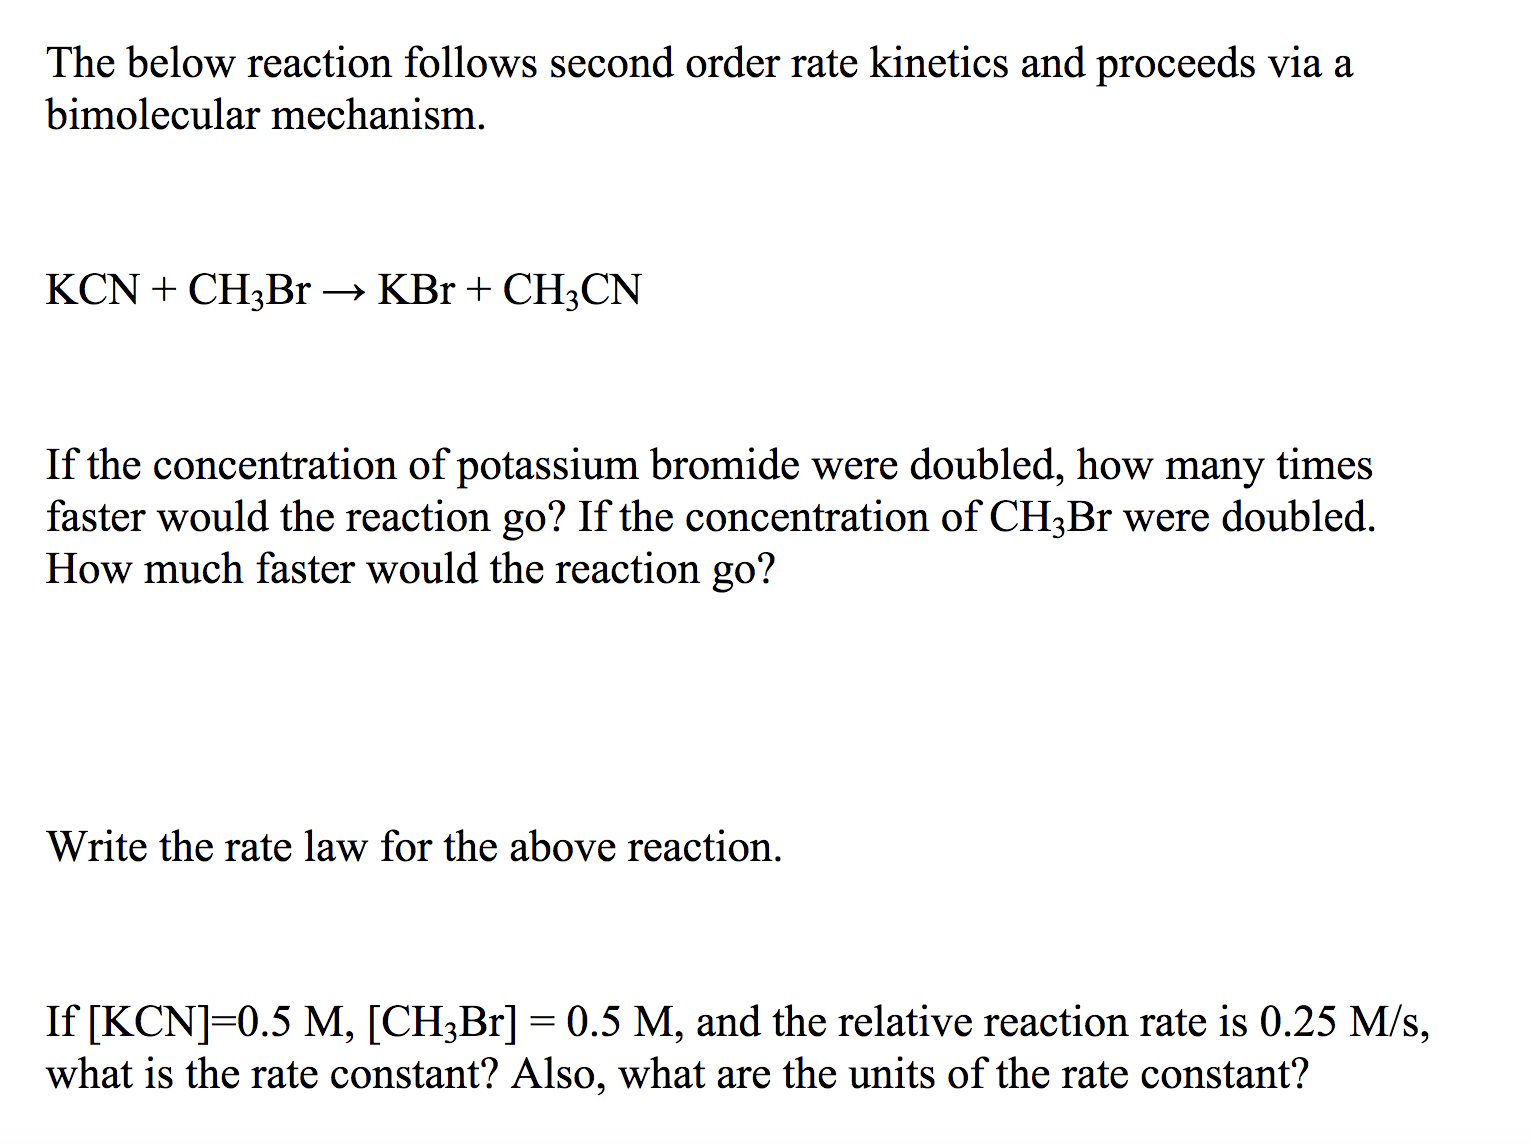 The below reaction follows second order rate kinetics and proceeds via a
bimolecular mechanism.
KCNCH3B1 -» KBr + CH3CN
If the concentration of potassium bromide were doubled, how many times
faster would the reaction go? If the concentration of CH3Br were doubled.
How much faster would the reaction go?
Write the rate law for the above reaction.
If [KCN] 0.5 M, [CH3Br] 0.5 M, and the relative reaction rate is 0.25 M/s,
what is the rate constant? Also, what are the units of the rate constant?
